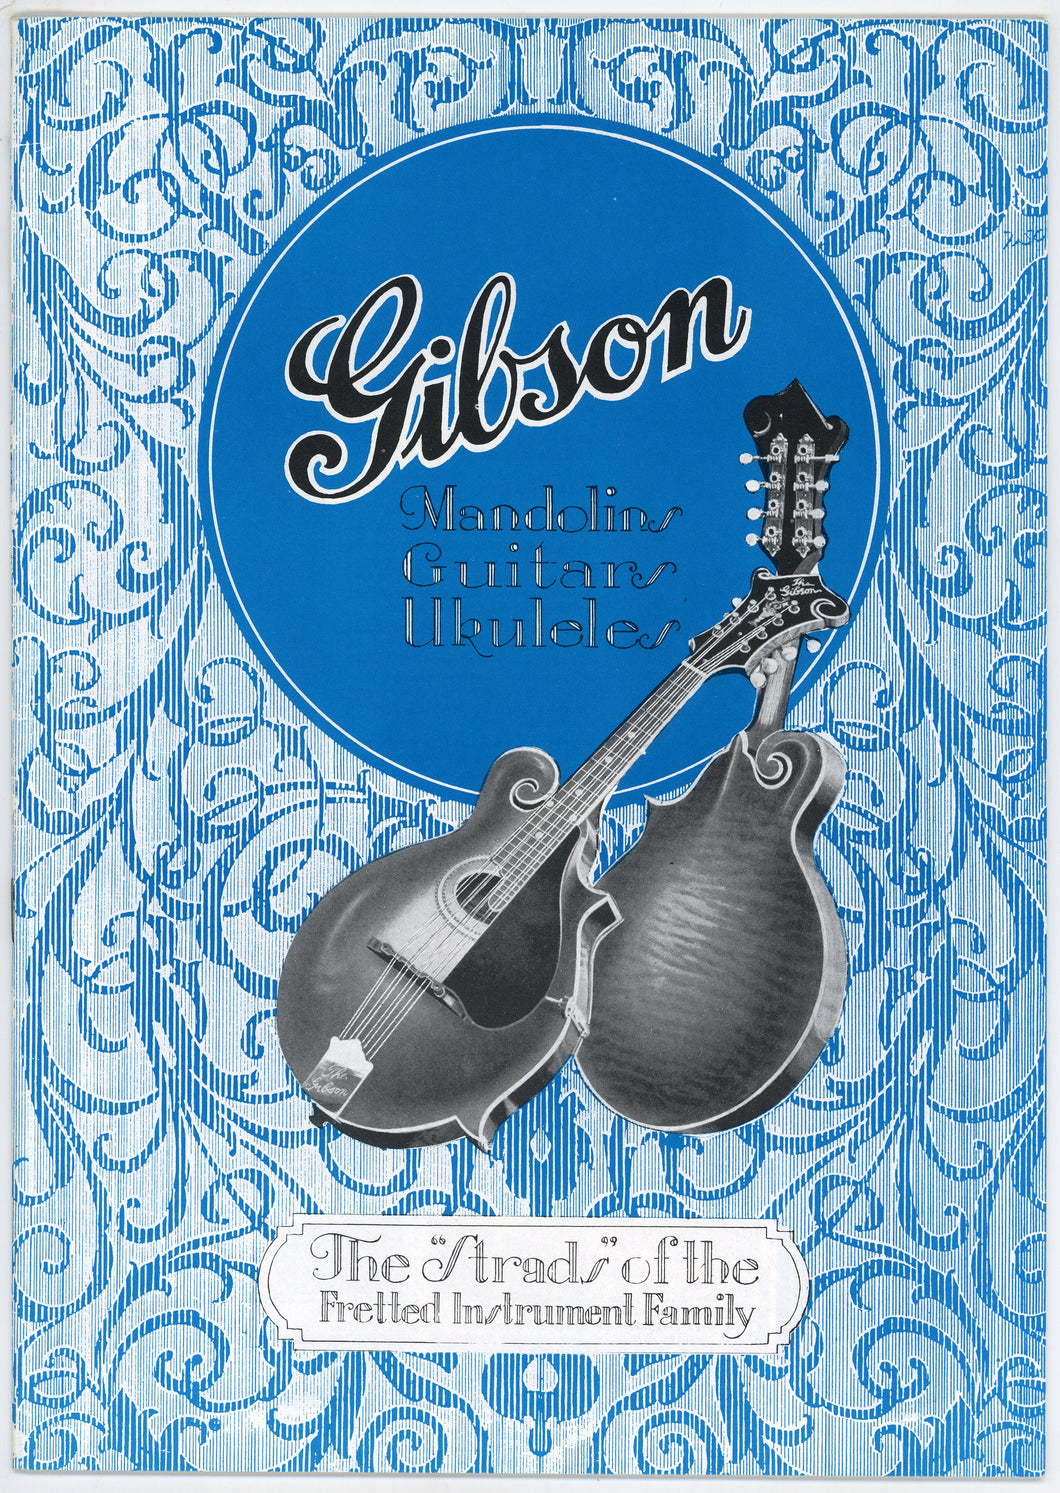 Gibson 1928 Q catalog reprint includes Gibson guitars, Gibson mandolins, and Gibson ukuleles